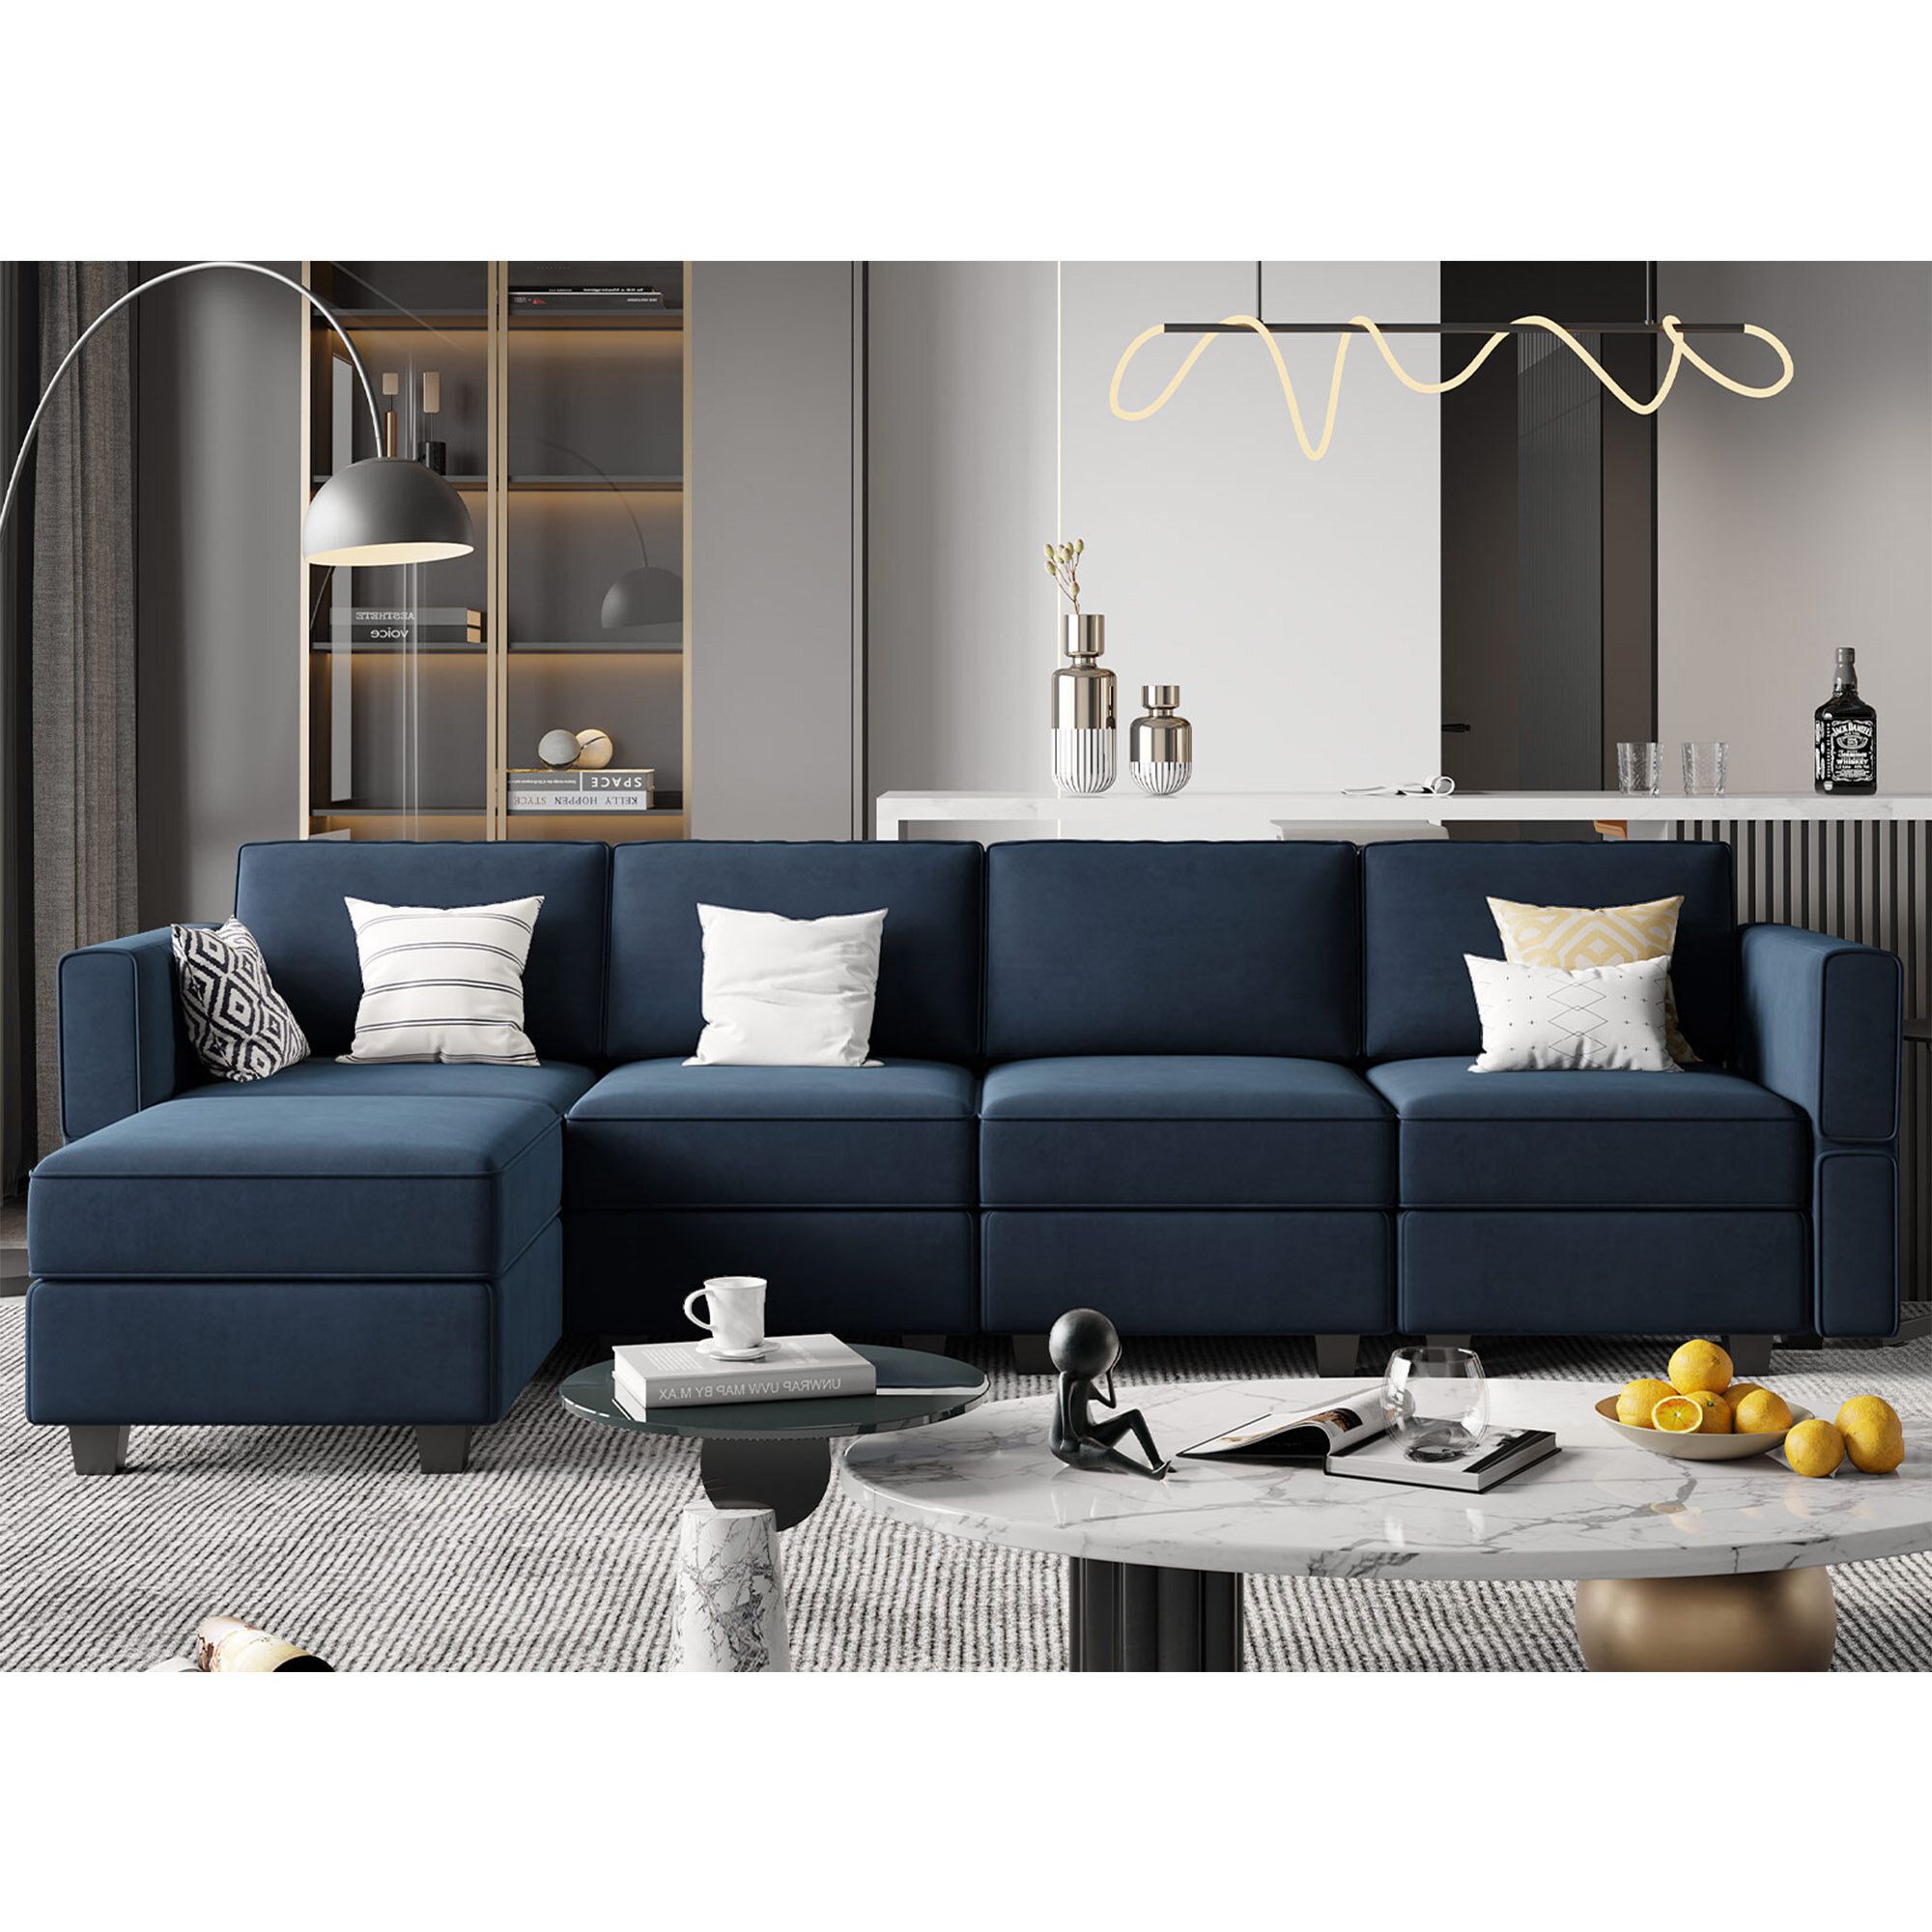 Latitude Run® Teangela 116.6'' Upholstered Sectional Sofa With Storage &  Reviews | Wayfair Intended For Sectional Sofa With Storage (Gallery 15 of 20)